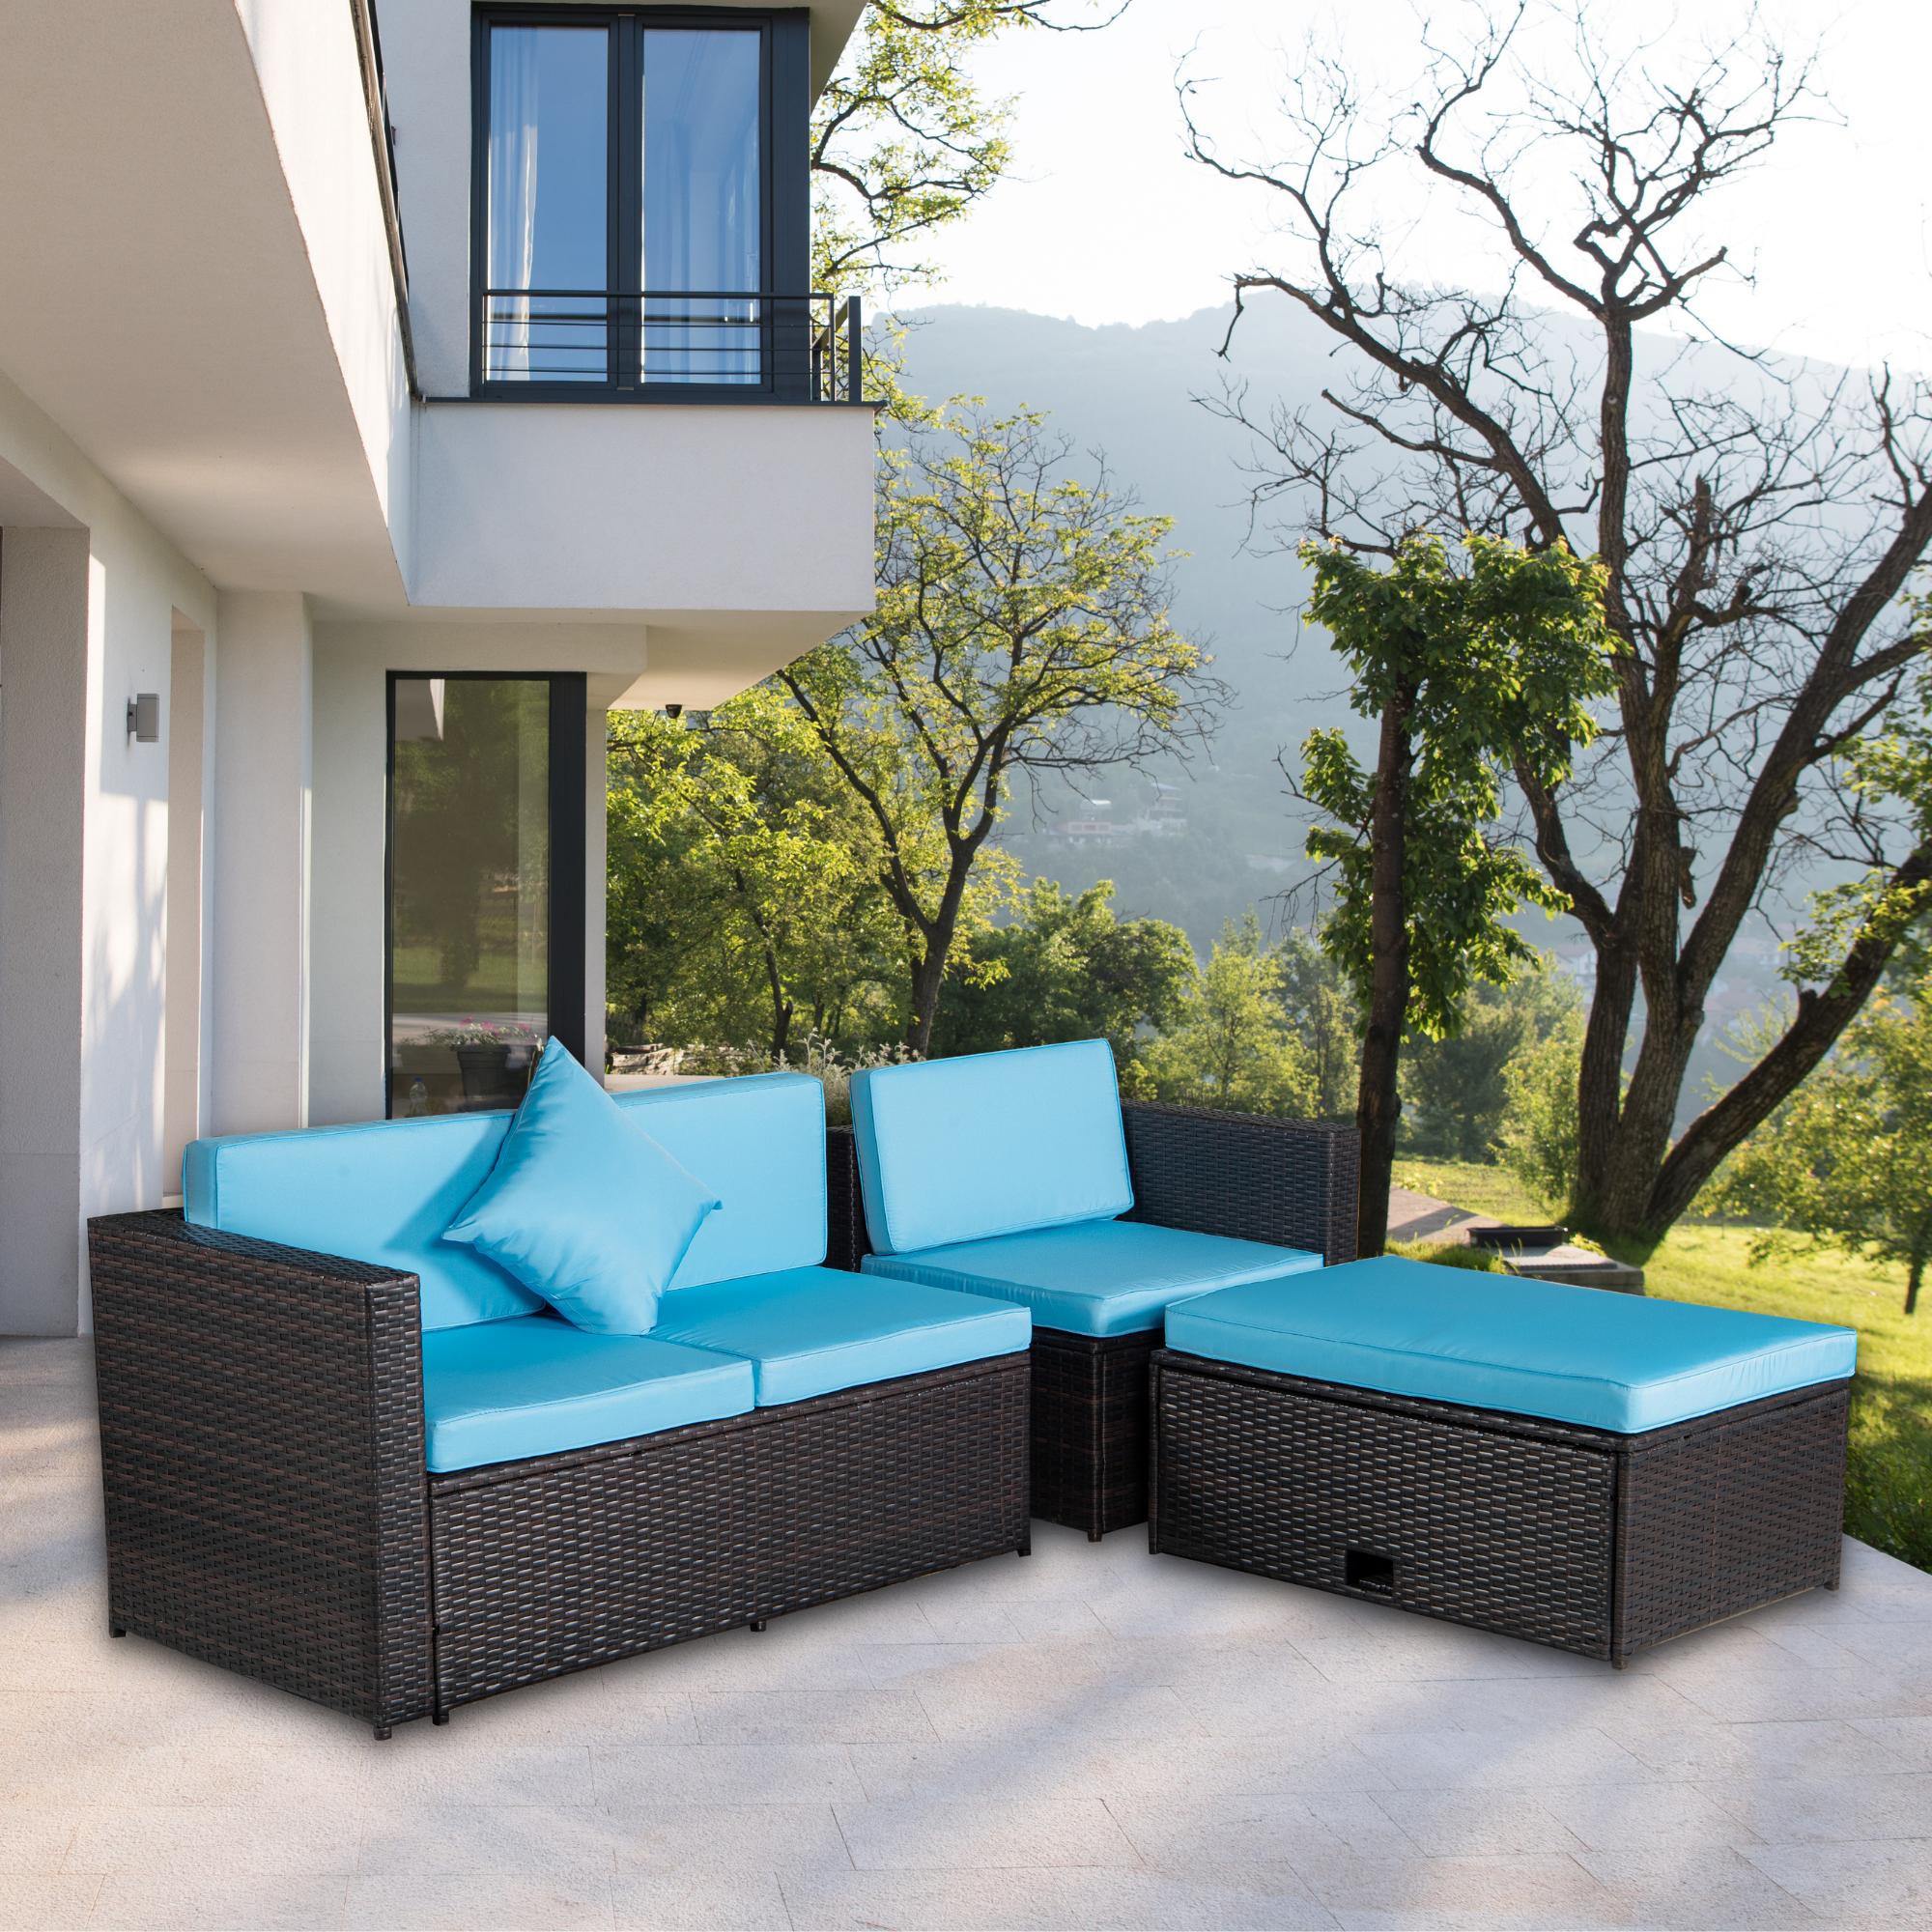 4 Pieces Patio Conversation Sets on Clearance, 4 Pieces Outdoor Wicker Patio Furniture Set with Seat Cushions & Tempered Glass Dining Table, Wicker Sofa Sets for Porch Poolside Backyard Garden, S8177 - image 2 of 10